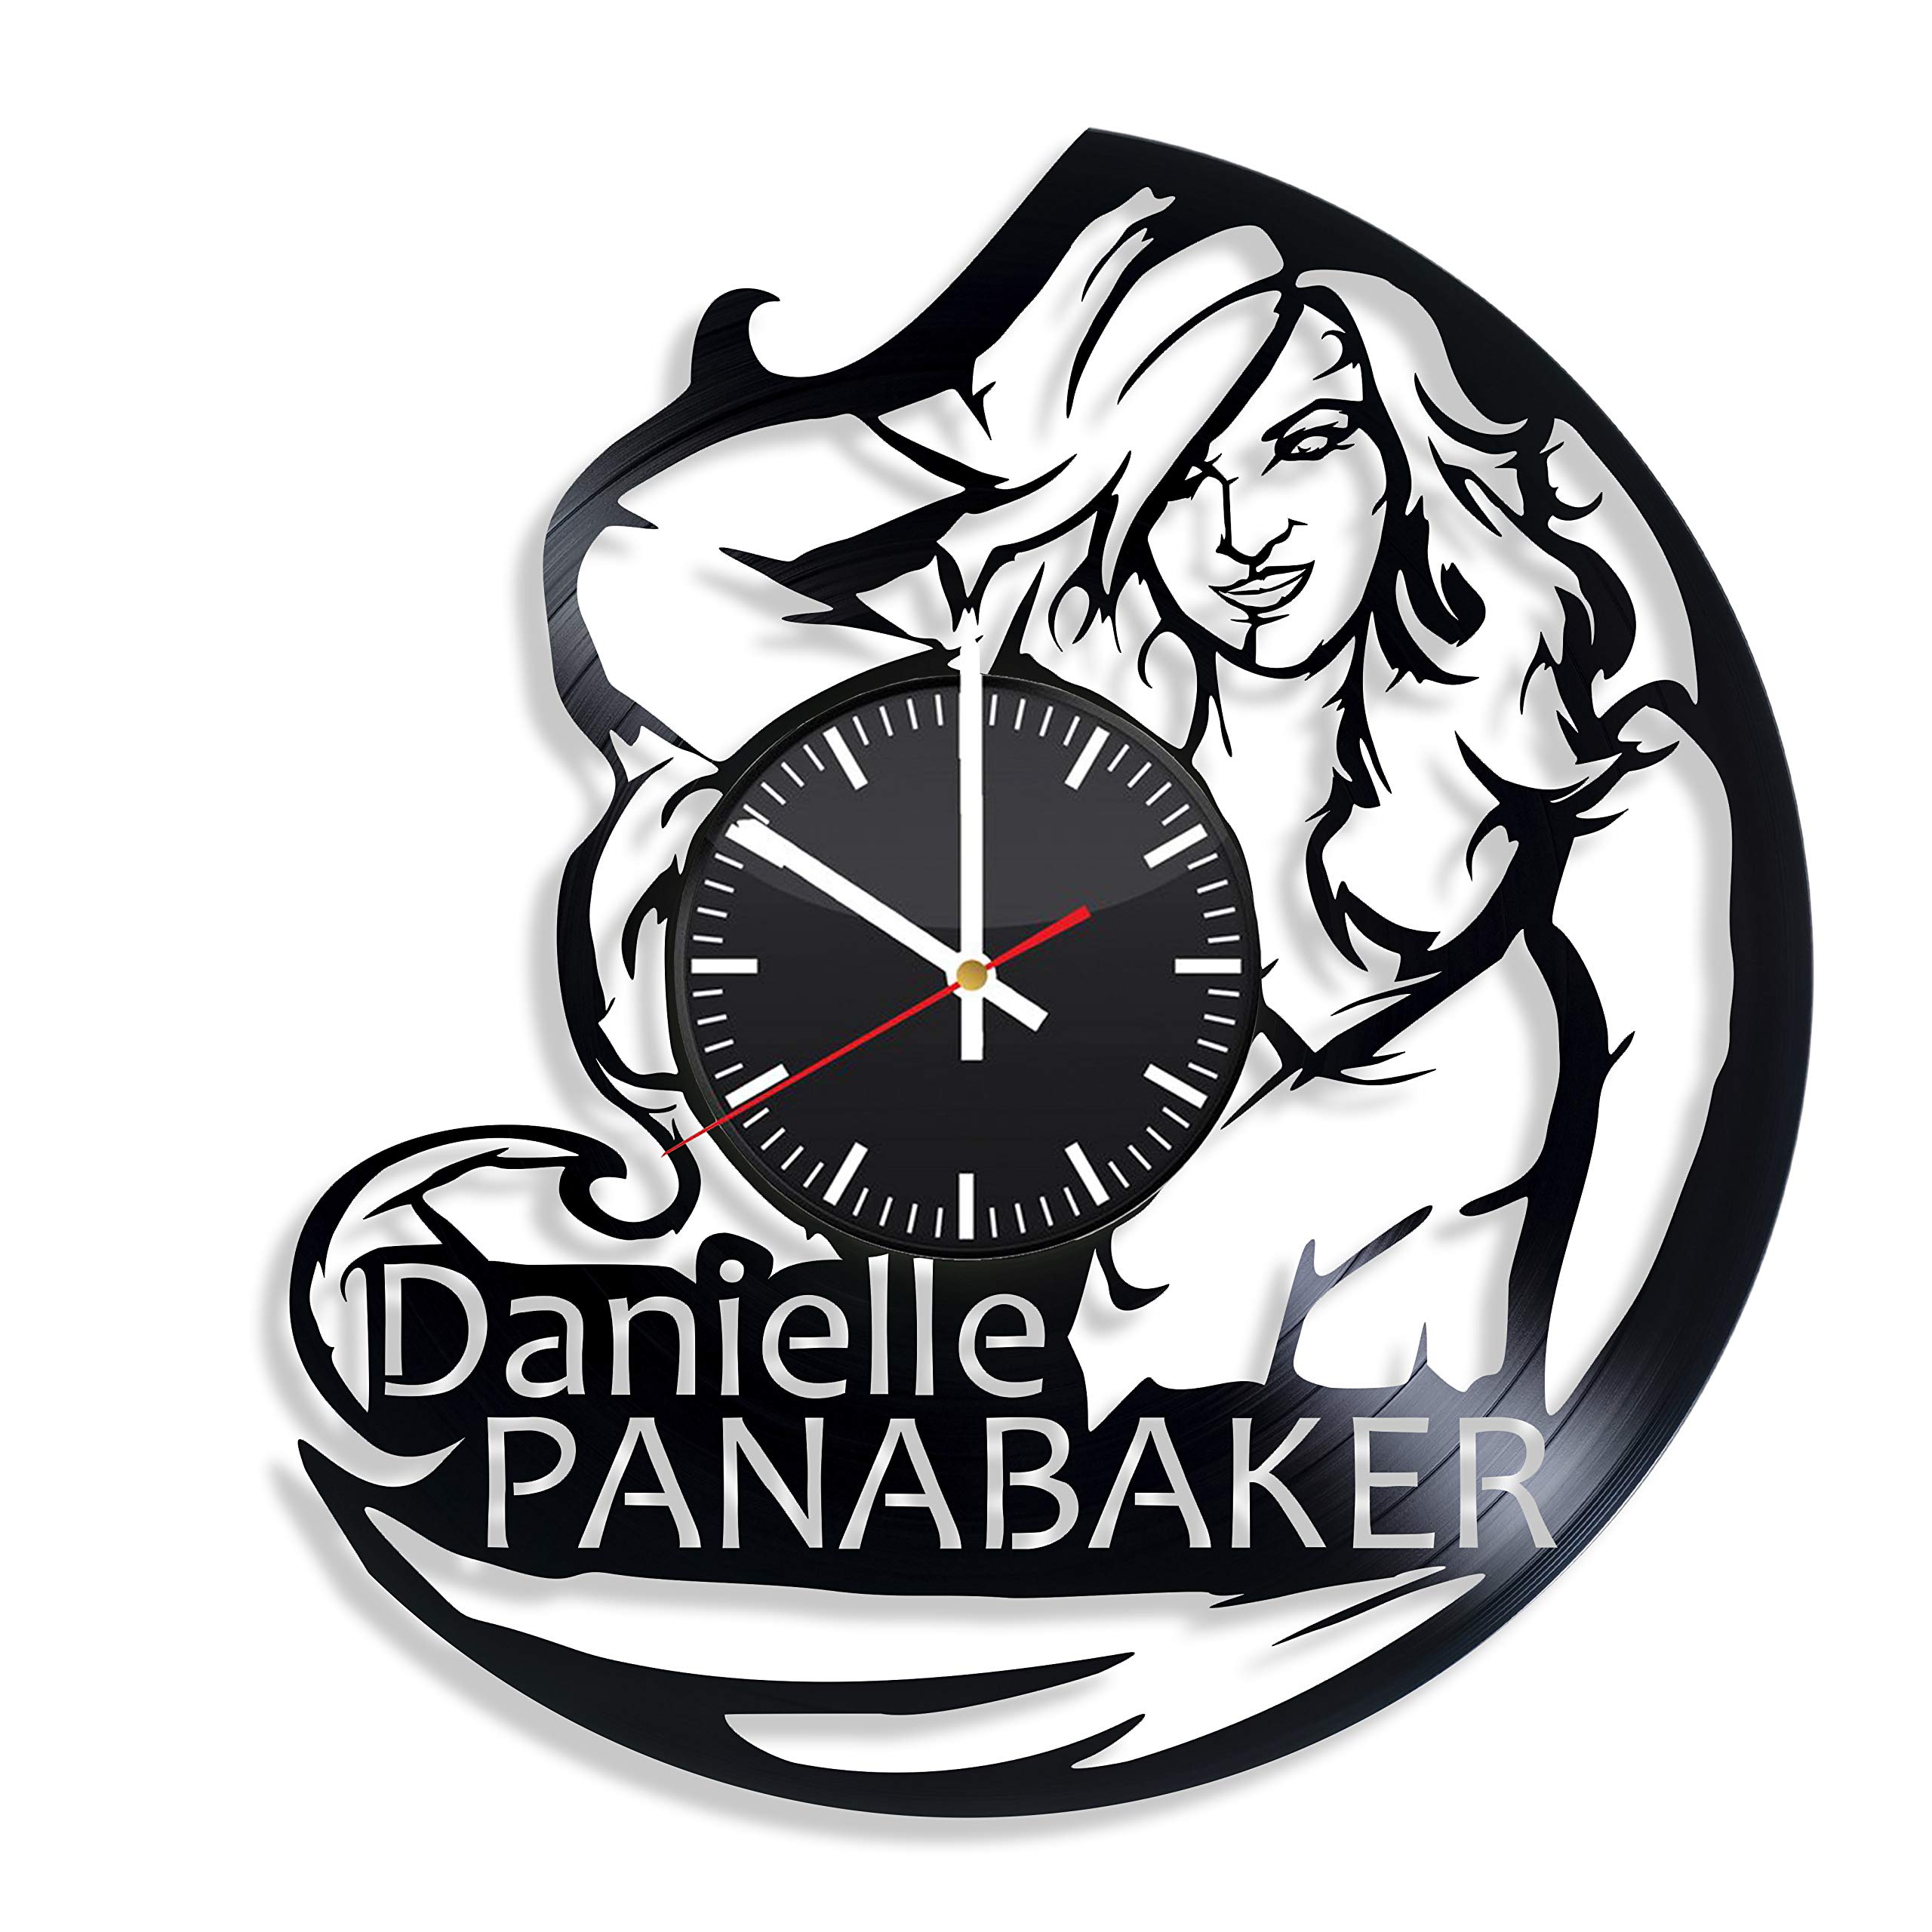 BroStore Decor Danielle Panabaker Vinyl Wall Clock, Clock with The Image of The Actor, American Actress, Art, Danielle Nicole Panabaker Gift for Any Occasion